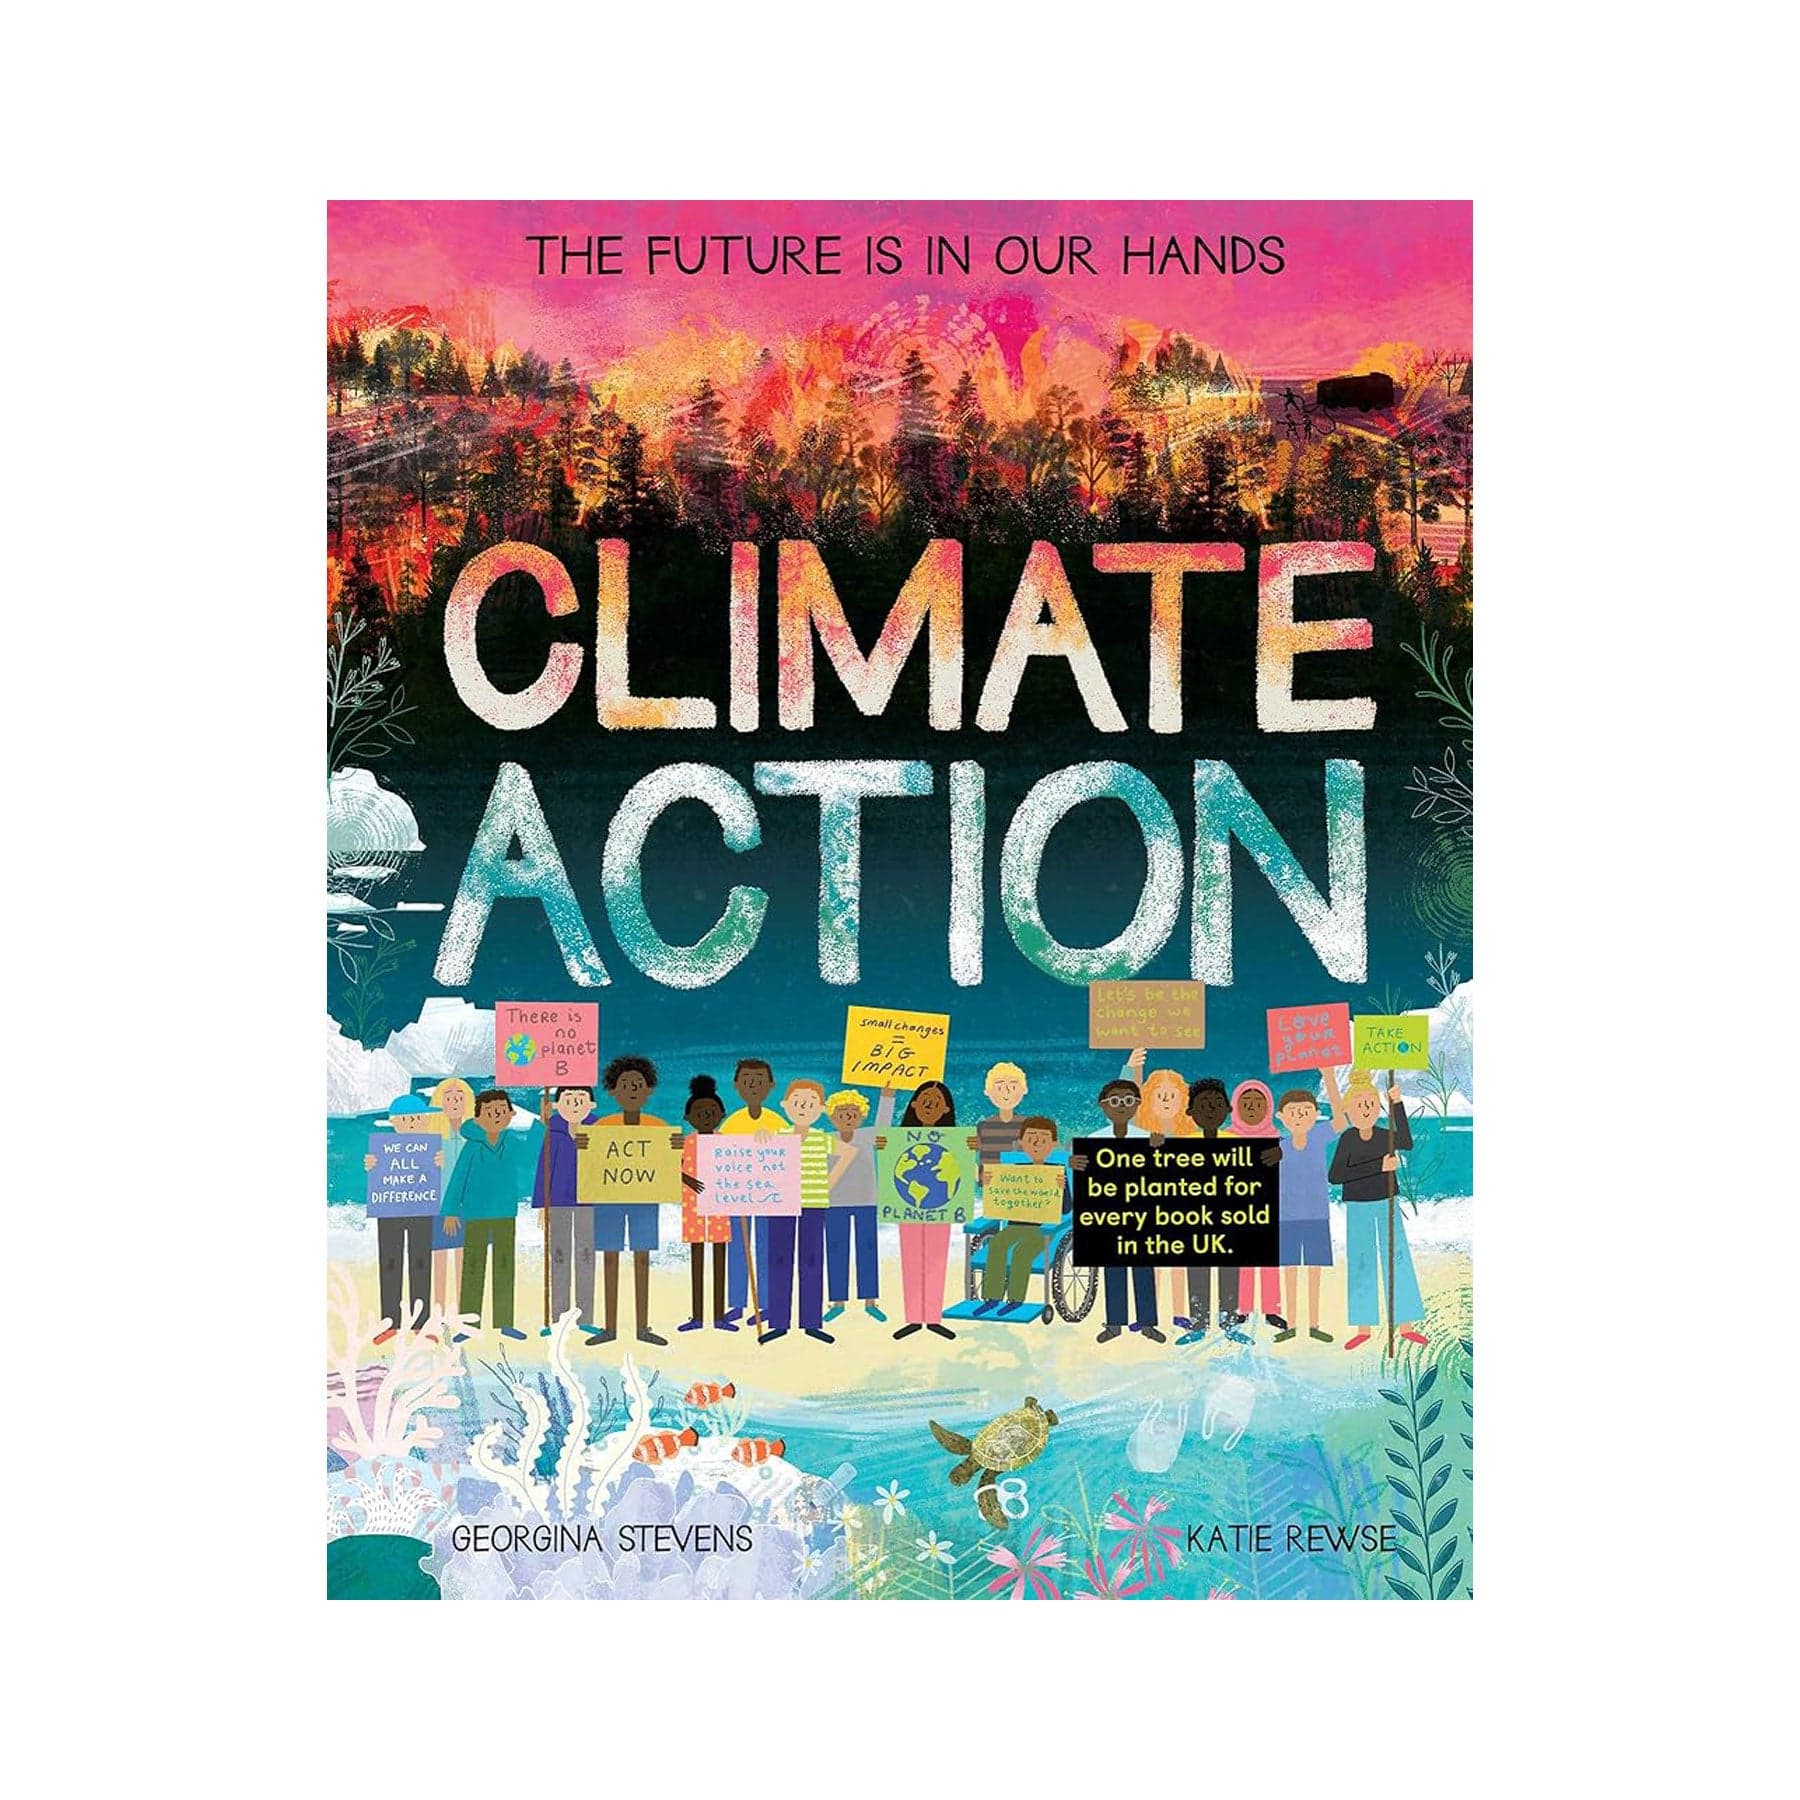 Climate action: The future is in our hands